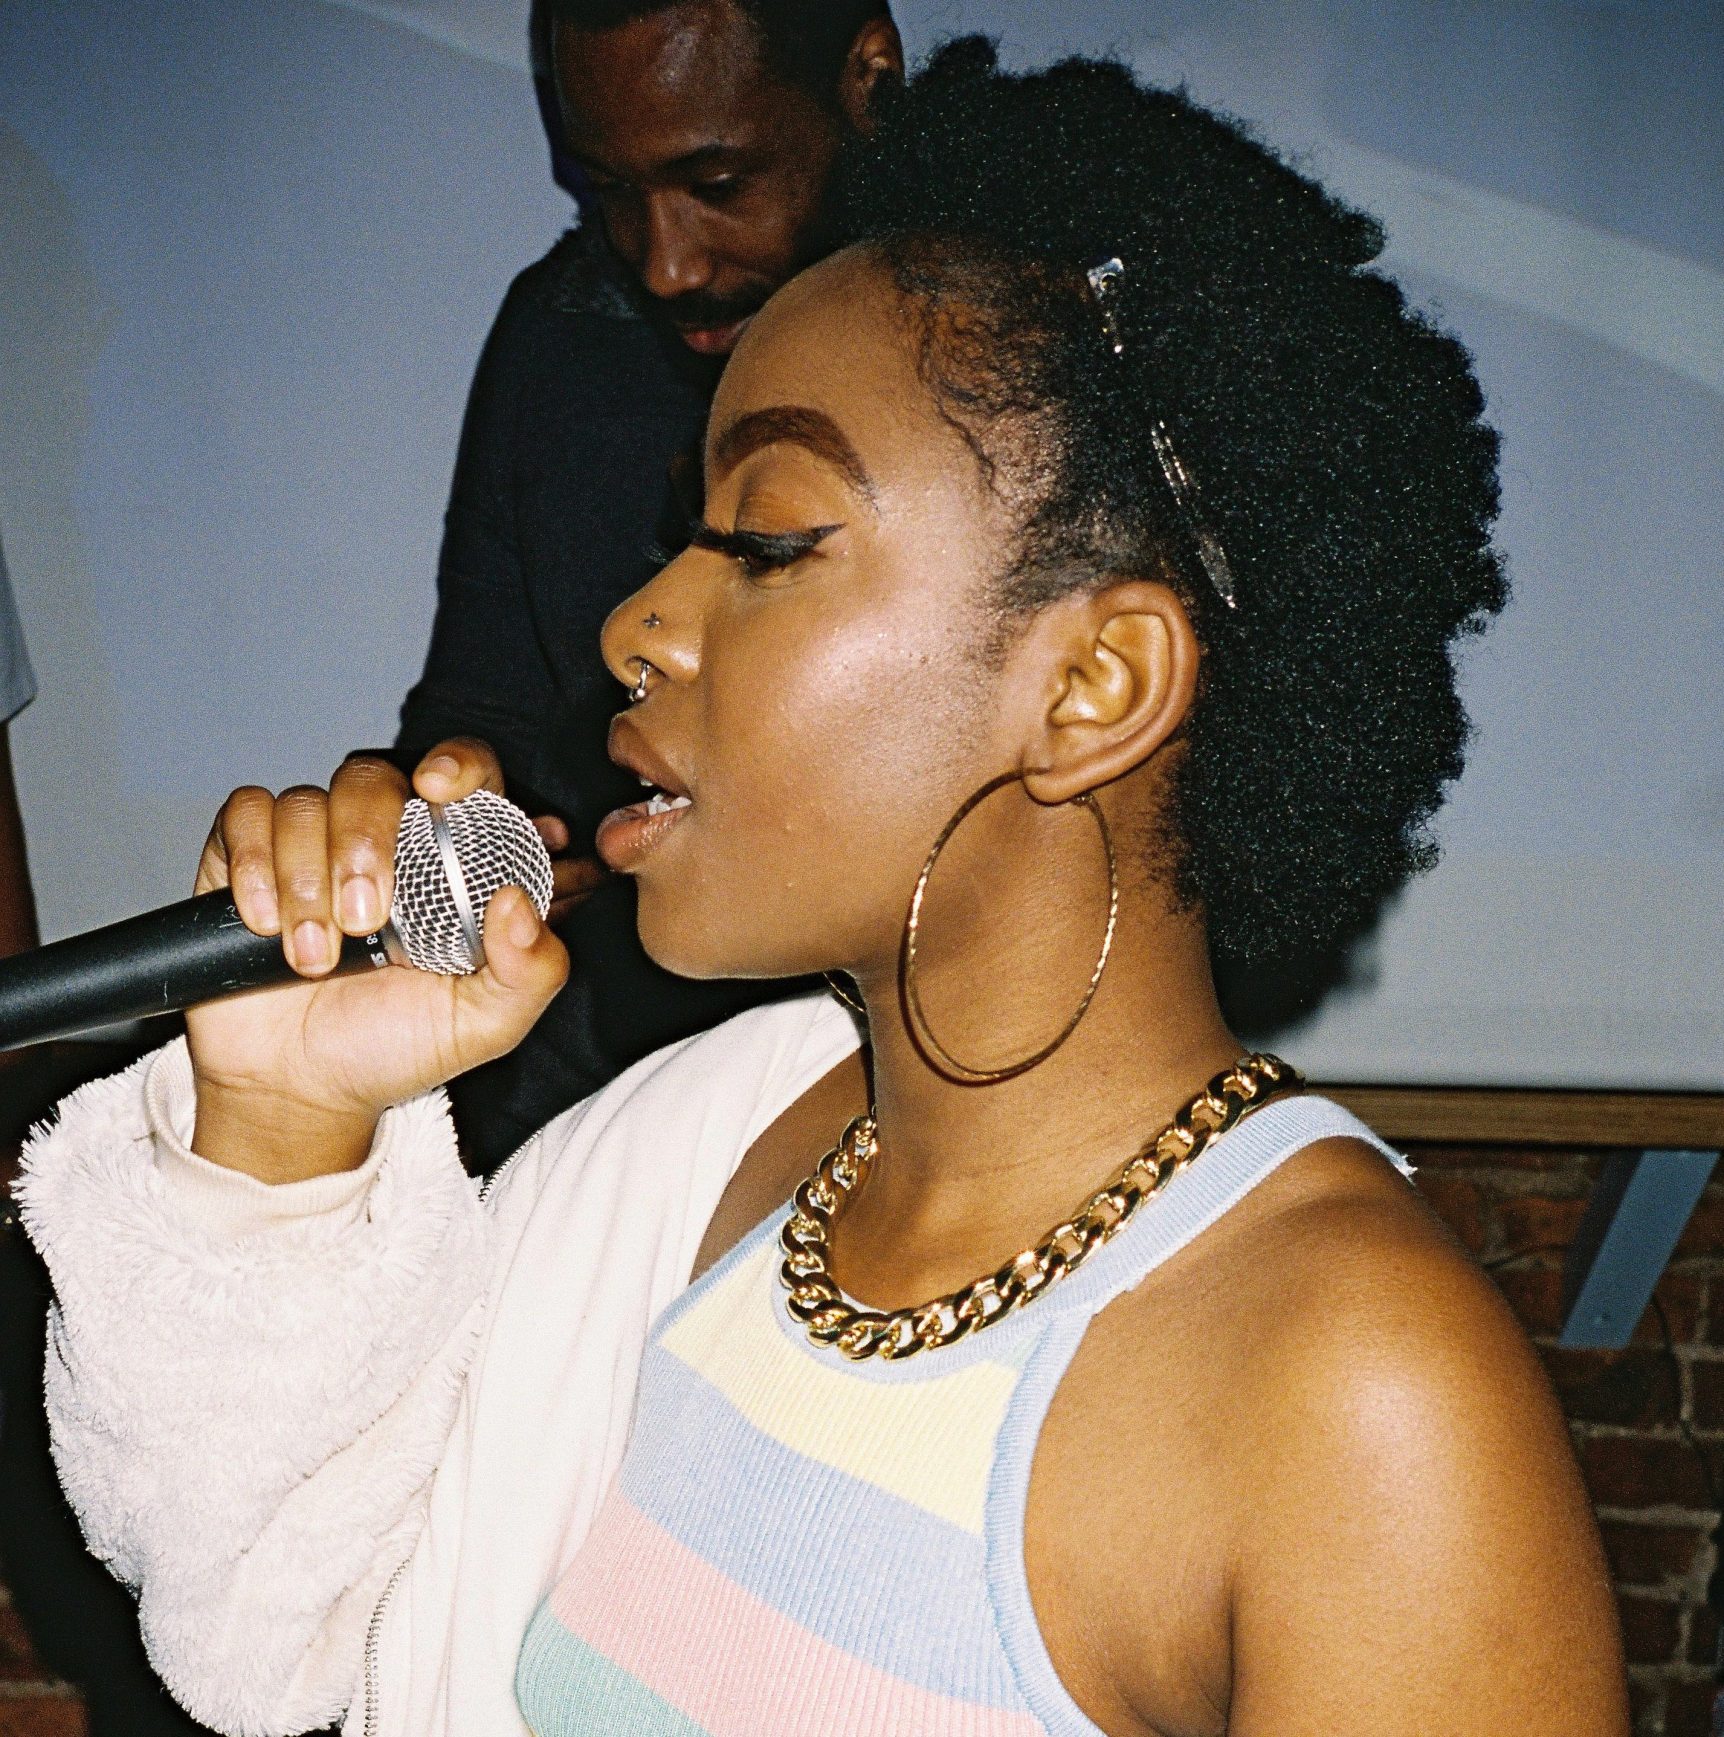 Rapper Medulla performs wearing pastel colours with a microphone close to her mouth and a DJ mixes in the background.